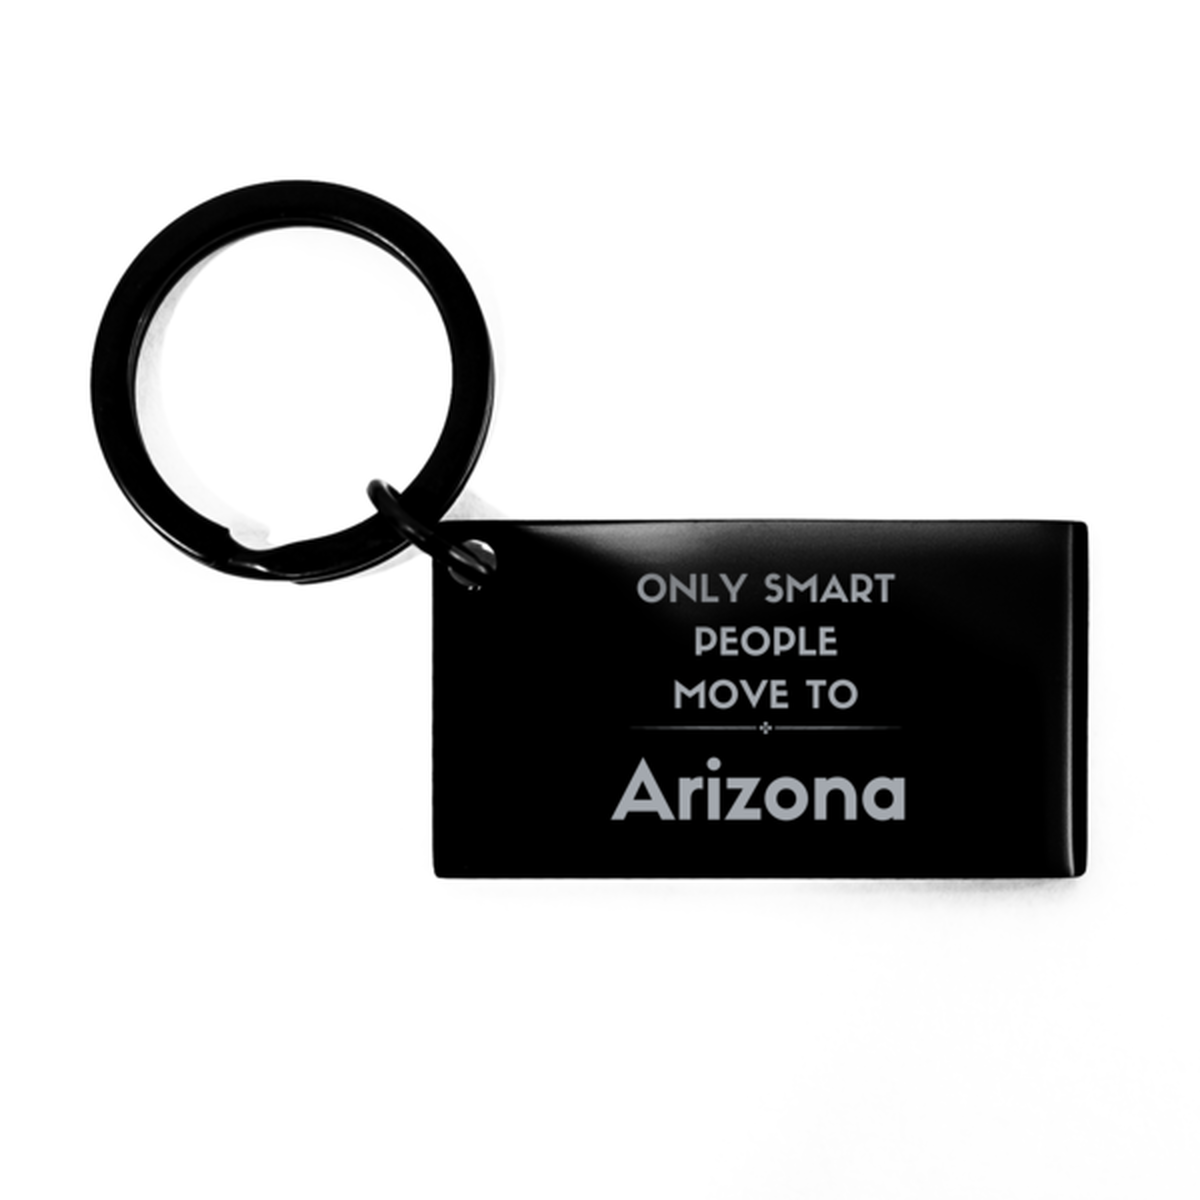 Only smart people move to Arizona Keychain, Gag Gifts For Arizona, Move to Arizona Gifts for Friends Coworker Funny Saying Quote